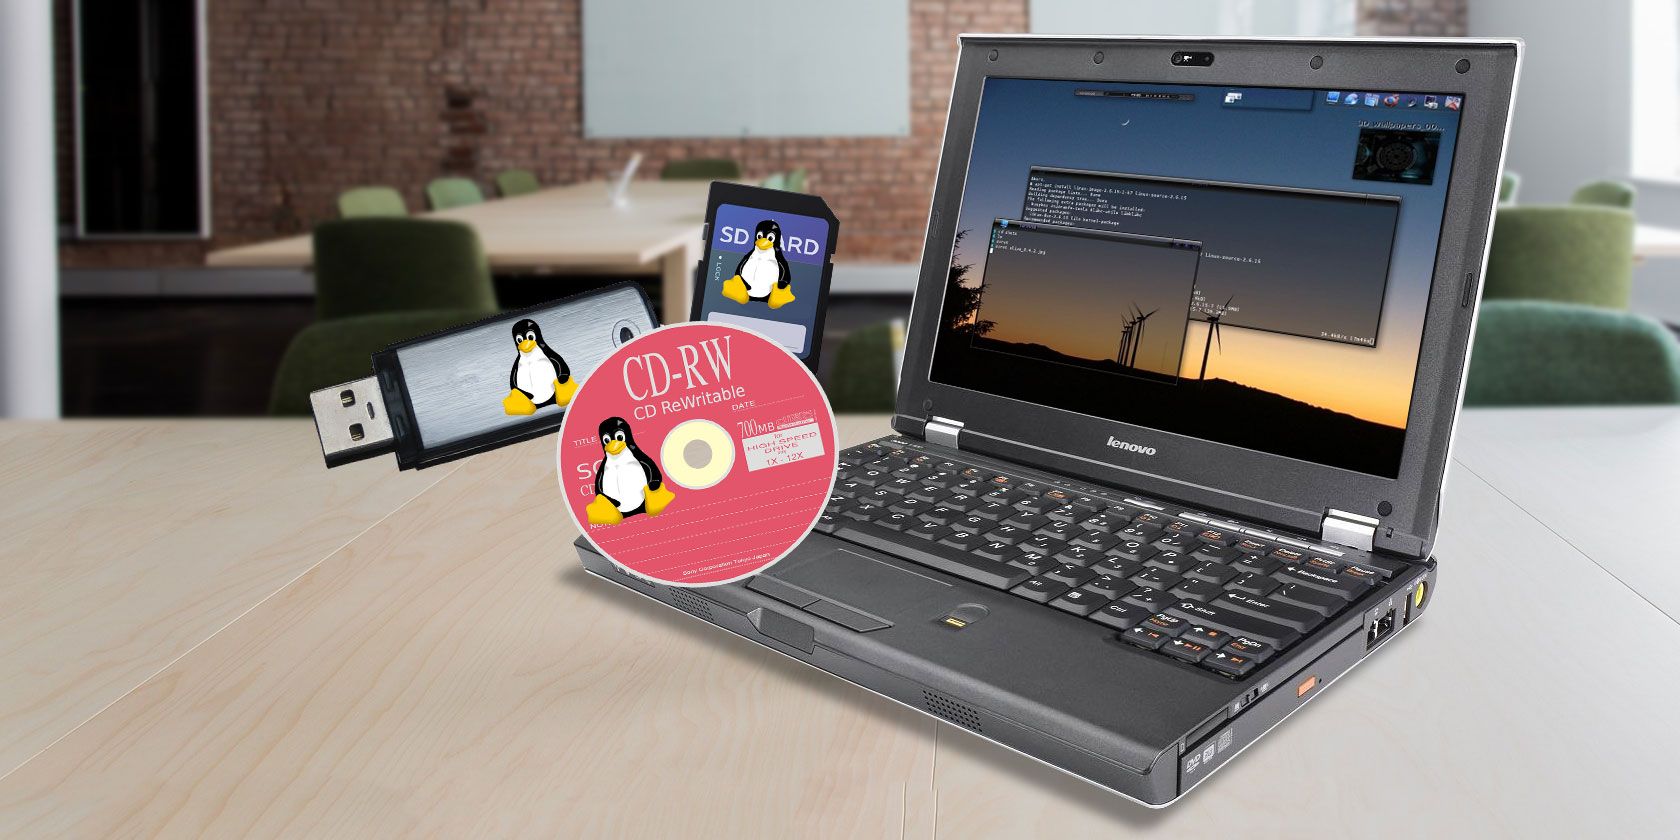 small linux through the windows